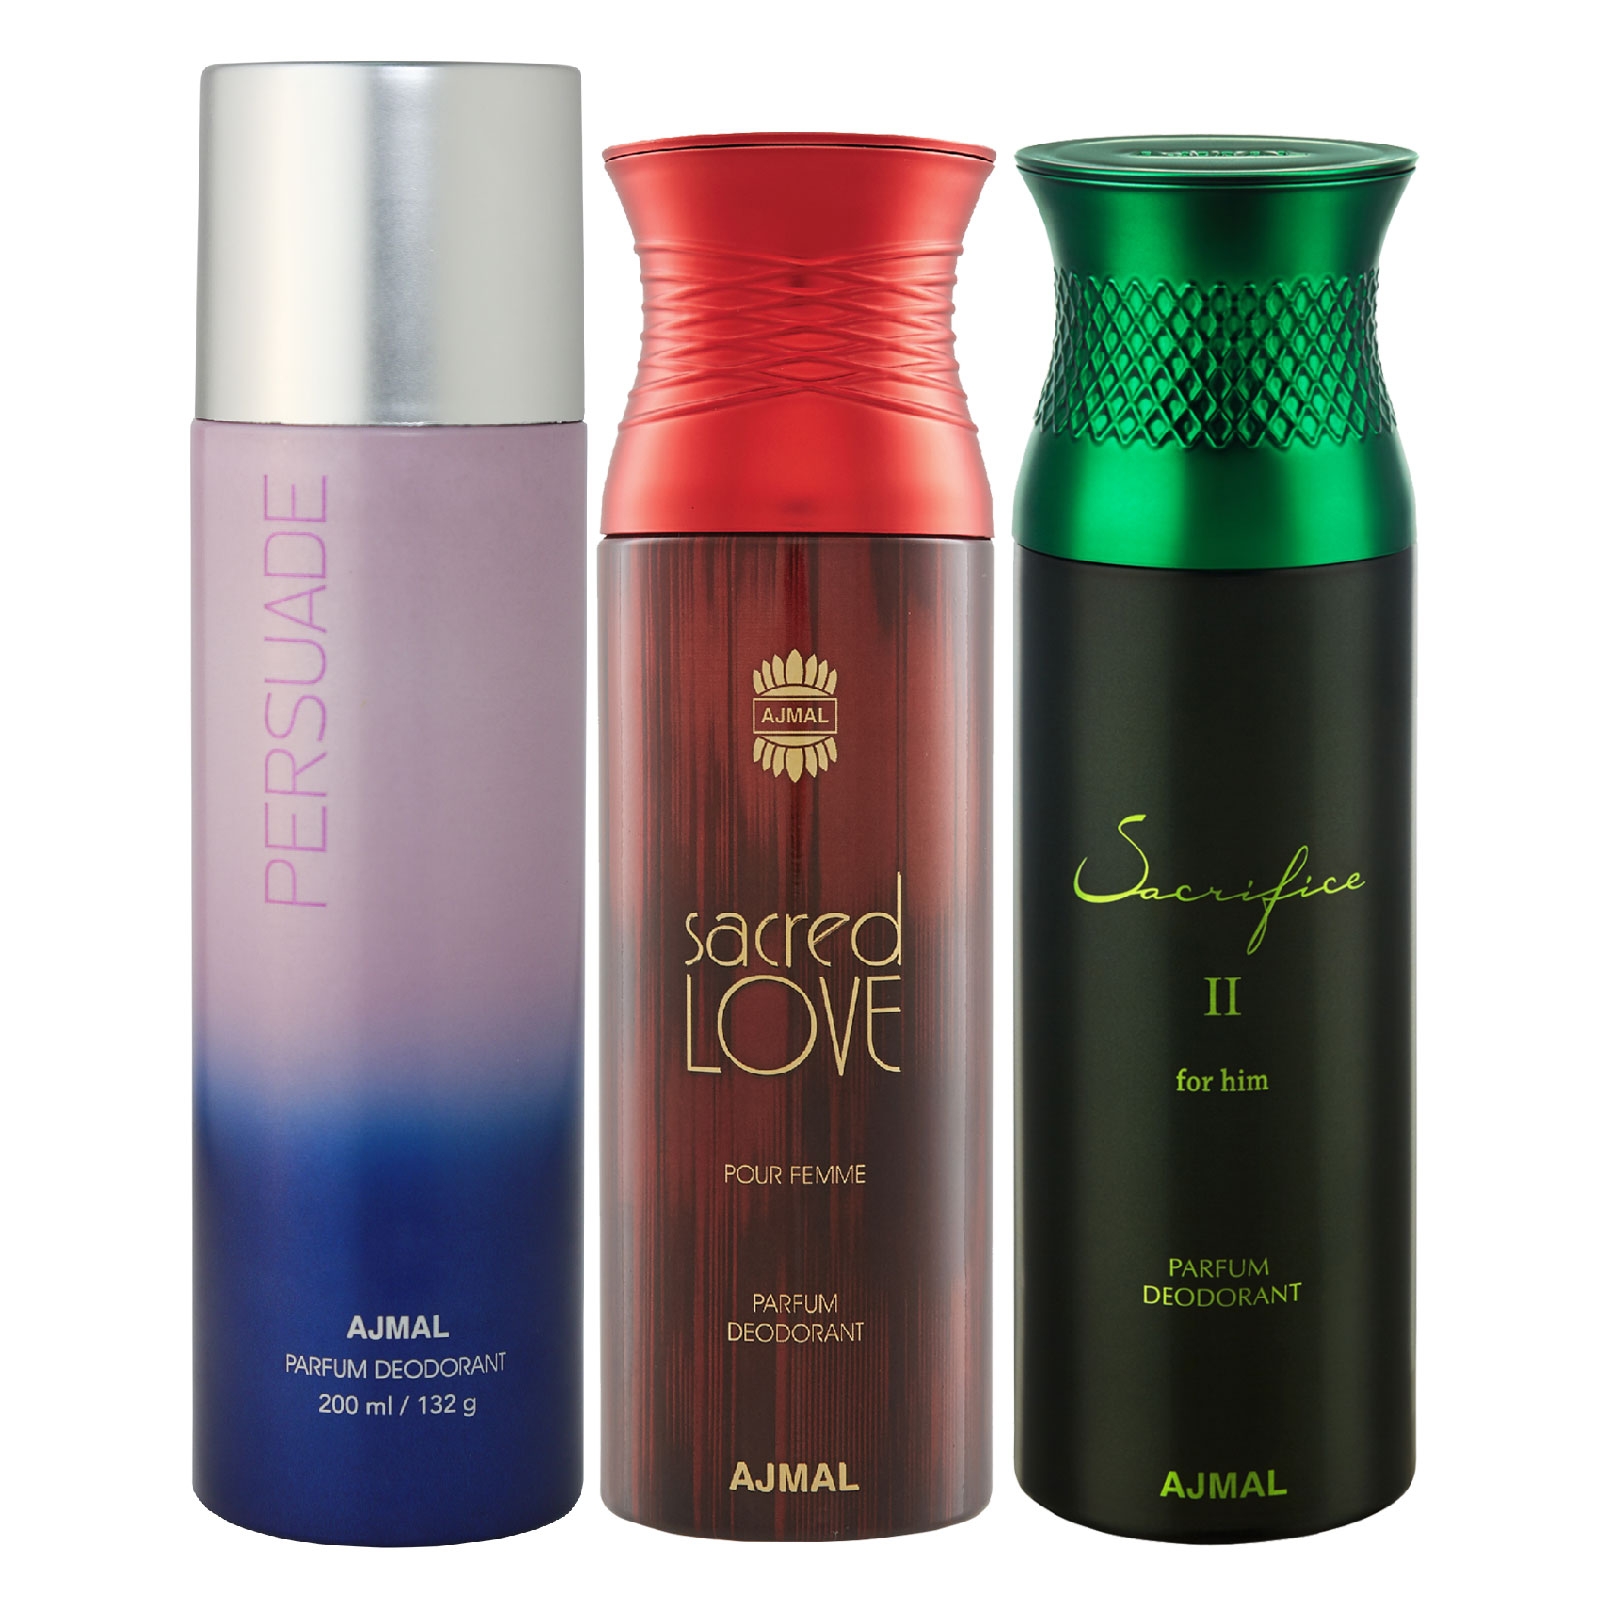 Ajmal | Ajmal 1 Persuade for Men & Women, 1 Sacred Love for Women and 1 Sacrifice II for Him for Men High Quality Deodorants each 200ML Combo pack of 3 (Total 600ML) + 3 Parfum Testers